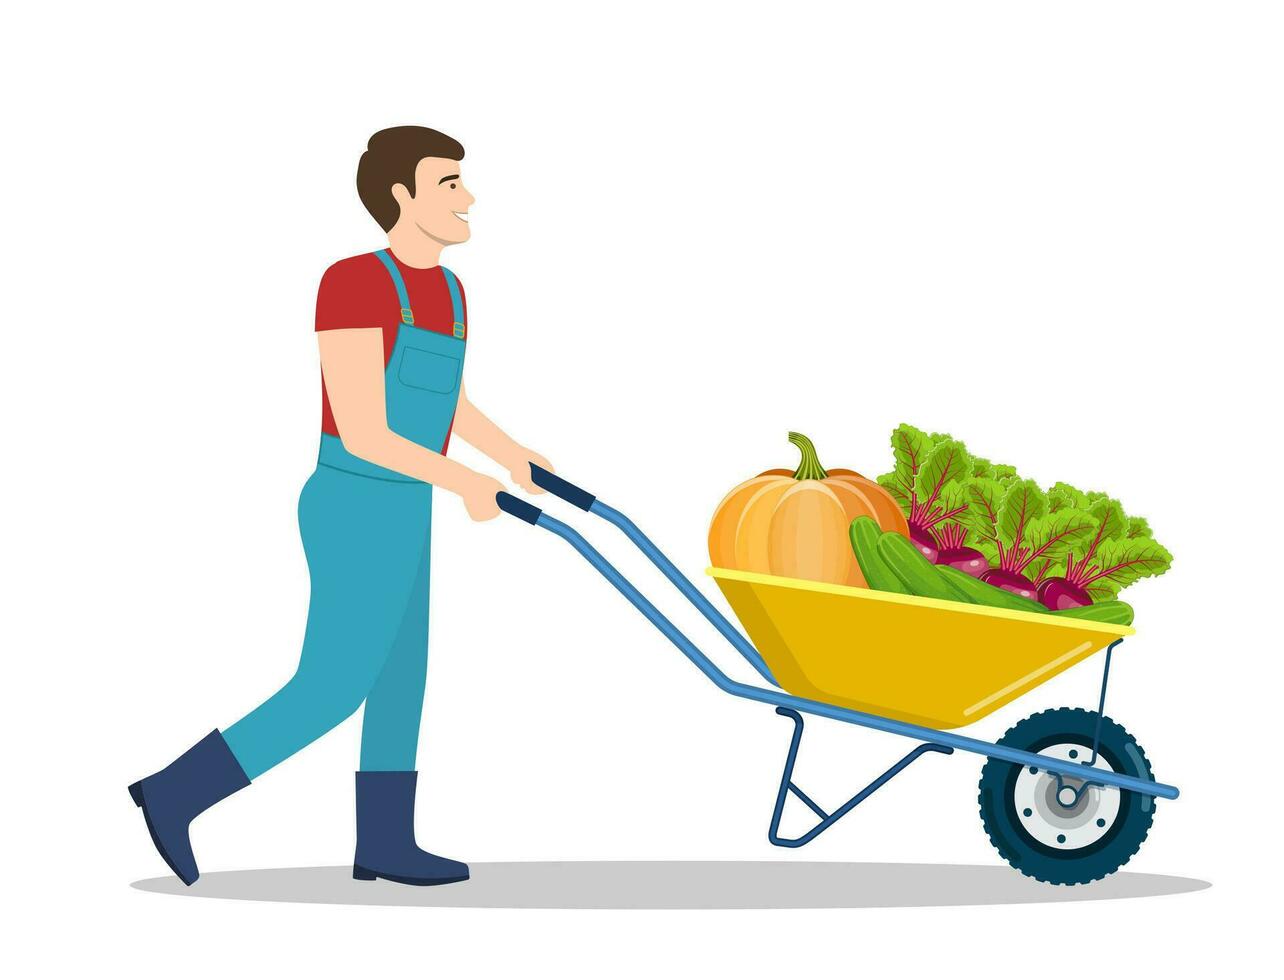 Farming man pushing wheelbarrow with beetroot, pumpkin, cucumber. Natural and tasty food. Organic farm products. male working on harvesting season. Vector illustration in flat style